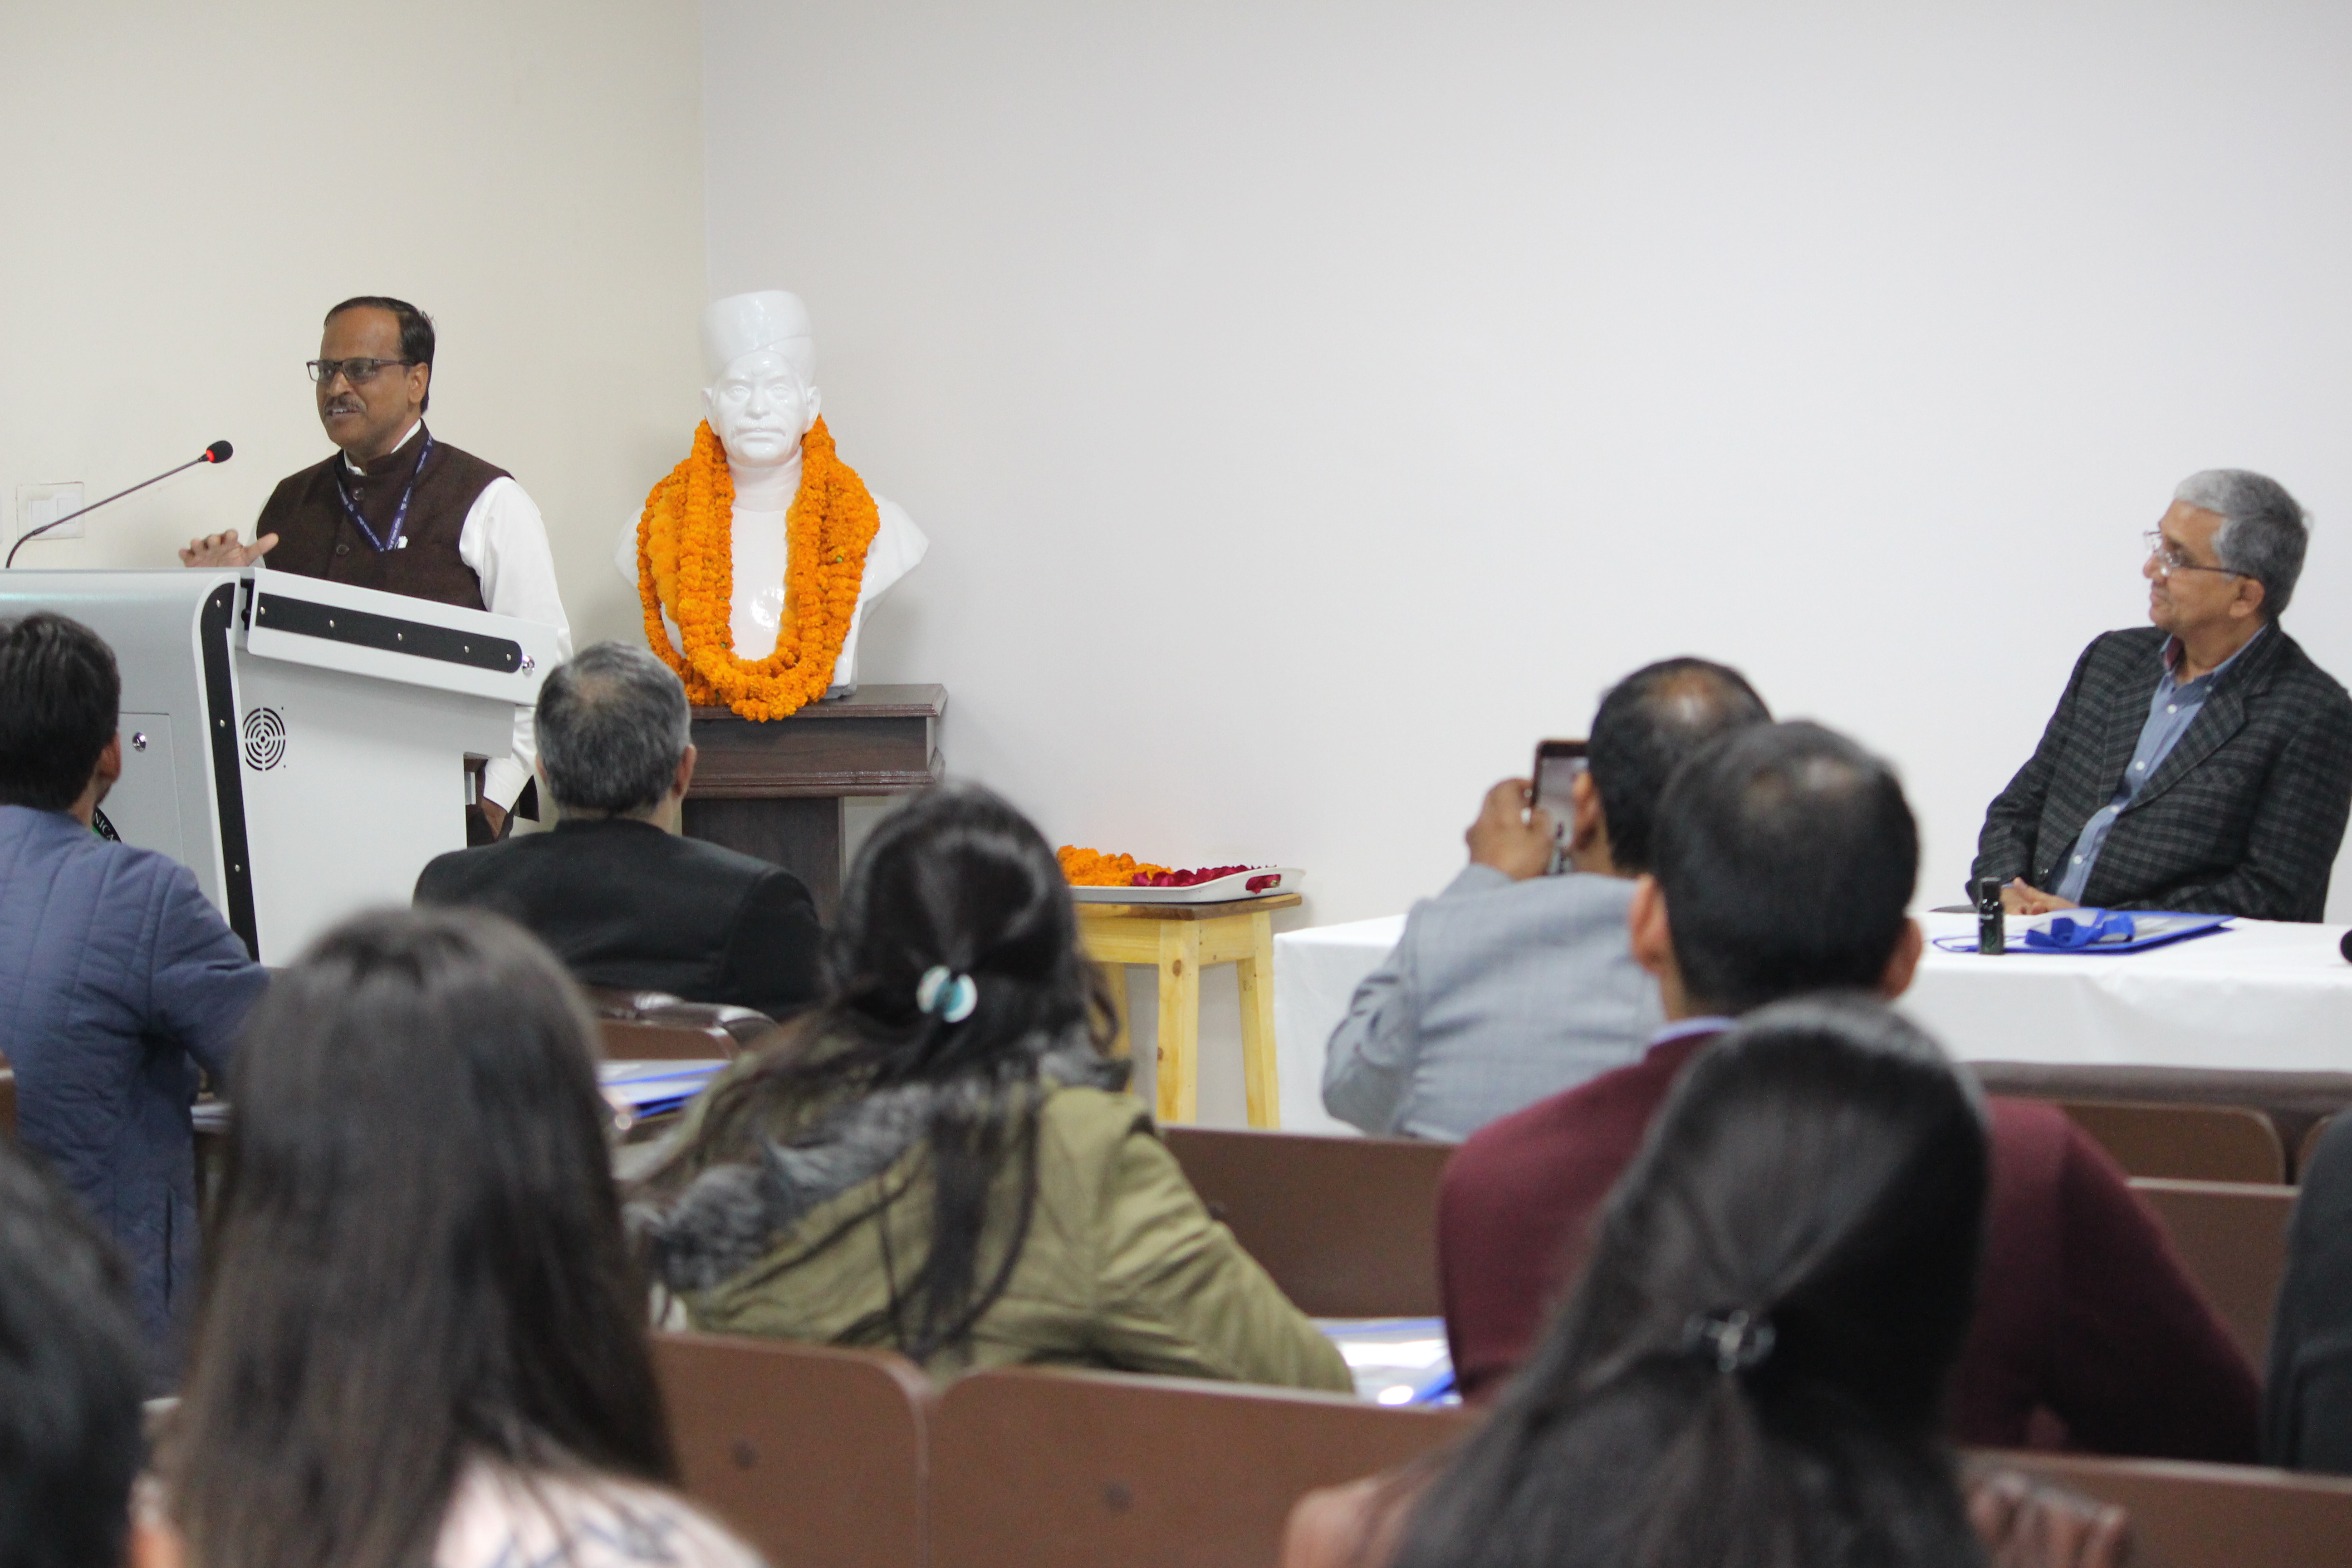 Remarks by Chief Guest Dr. T. K. Behera, Director, Indian Institute of Vegetable Research 